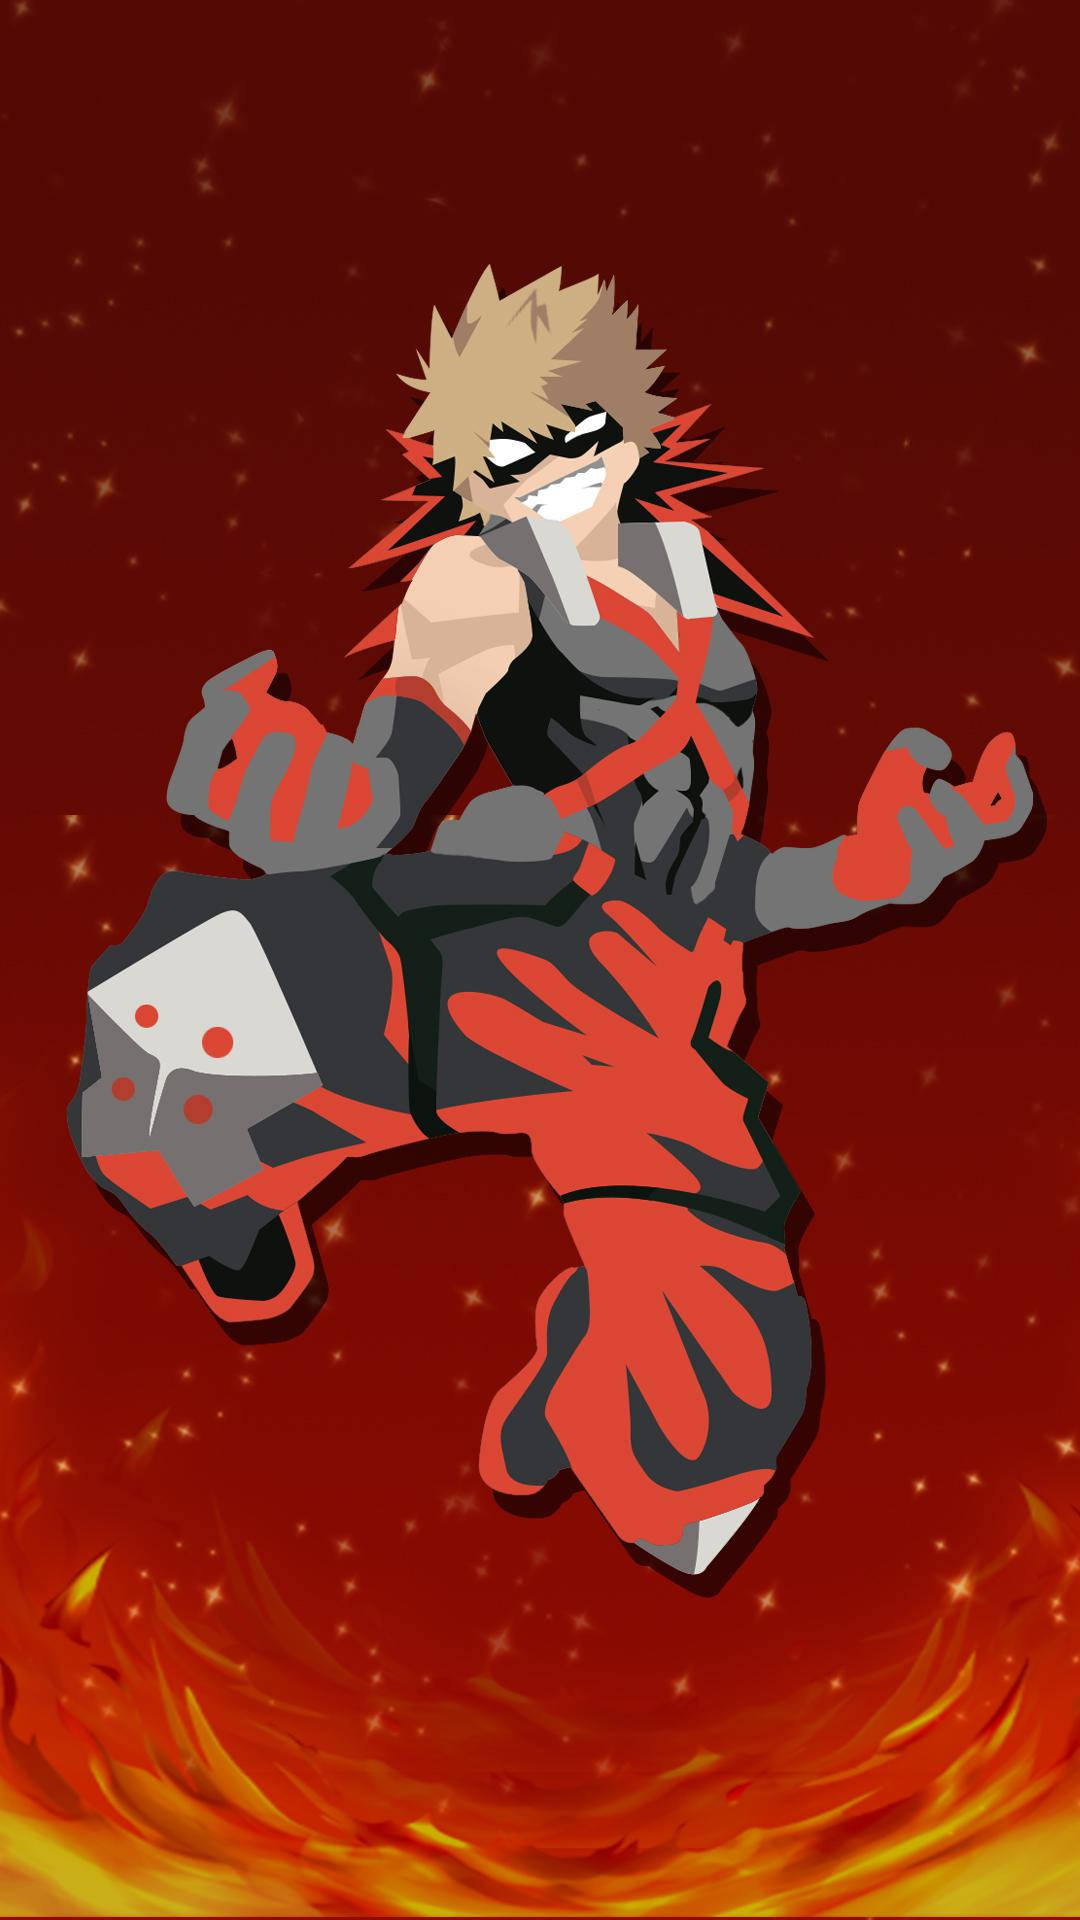 Follow The Lead Of Fan-favorite Bakugou Katsuki With This Cute Outfit Inspired By The My Hero Academia!